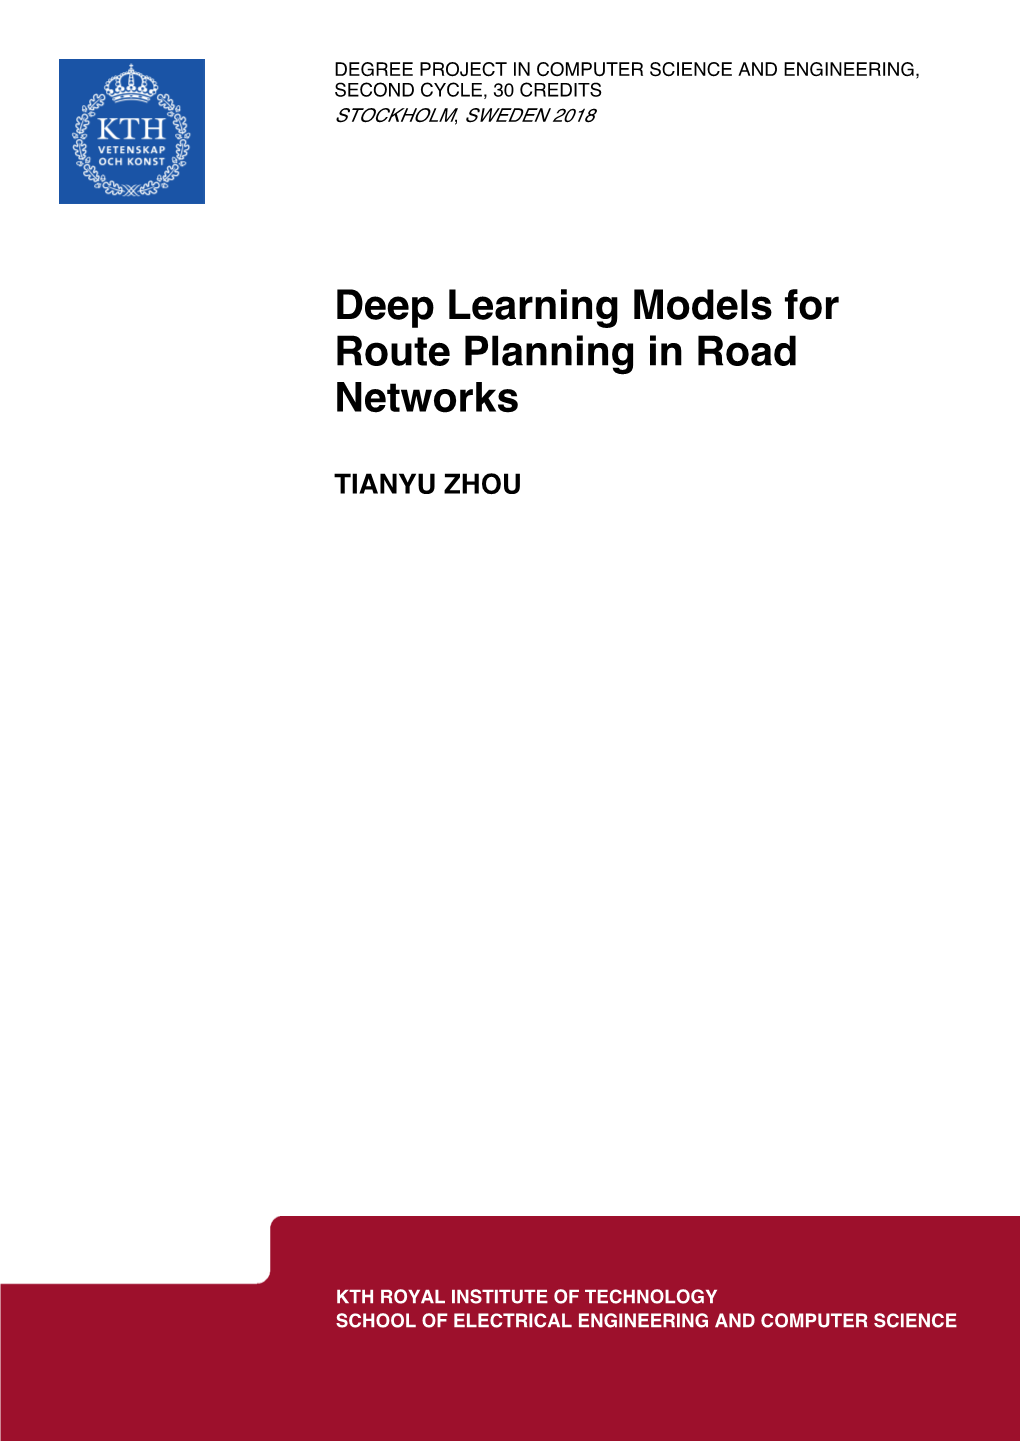 Deep Learning Models for Route Planning in Road Networks